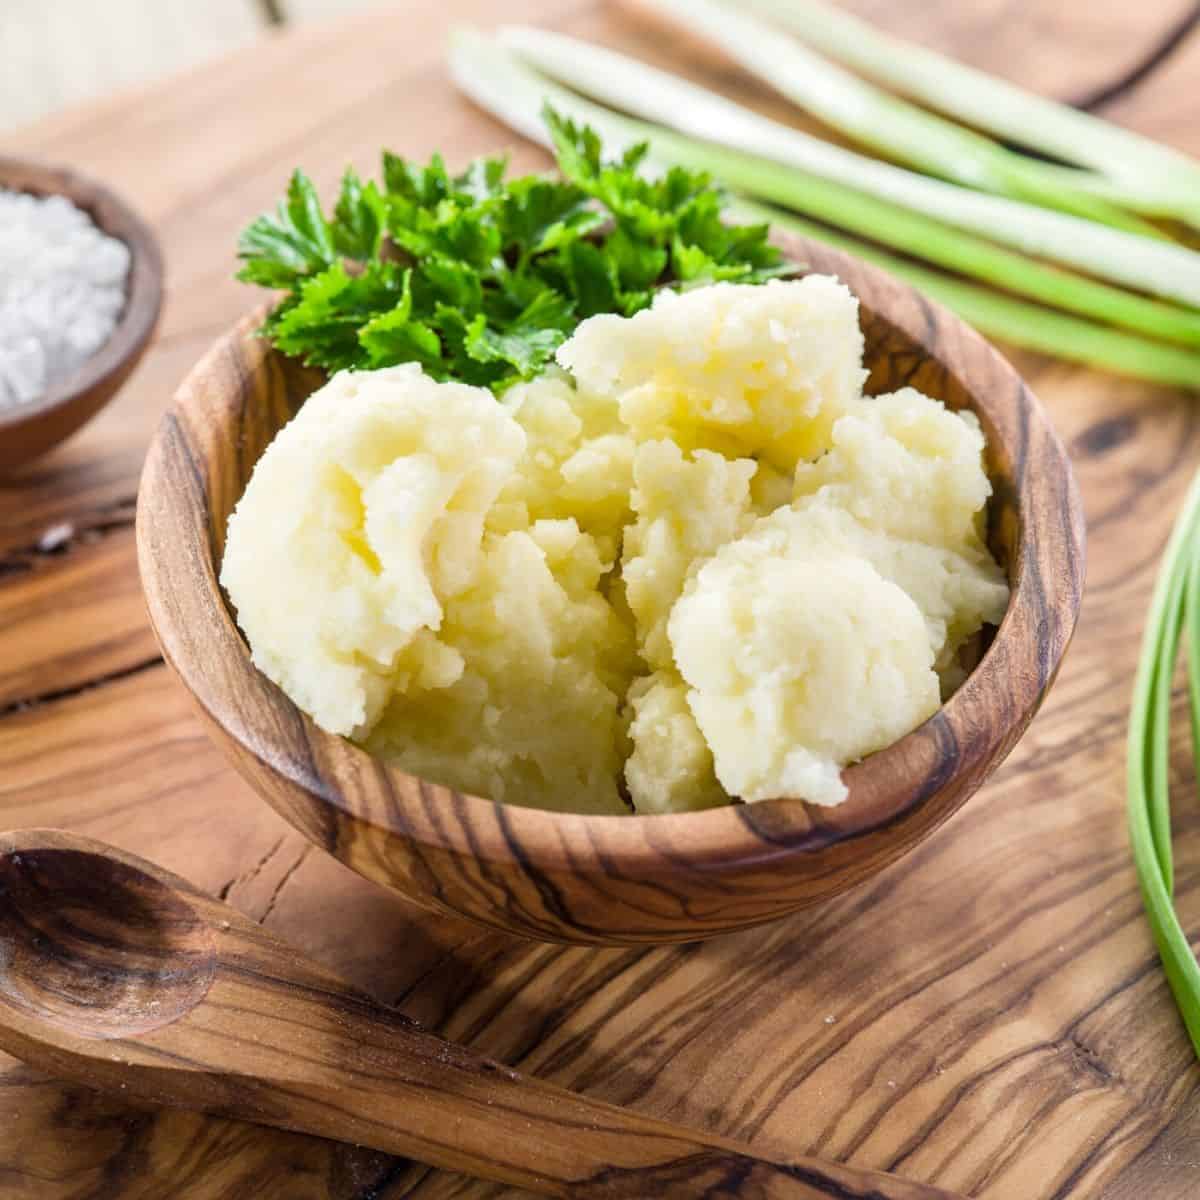 How to Make Delicious, Creamy, and Fluffy Mashed Potatoes